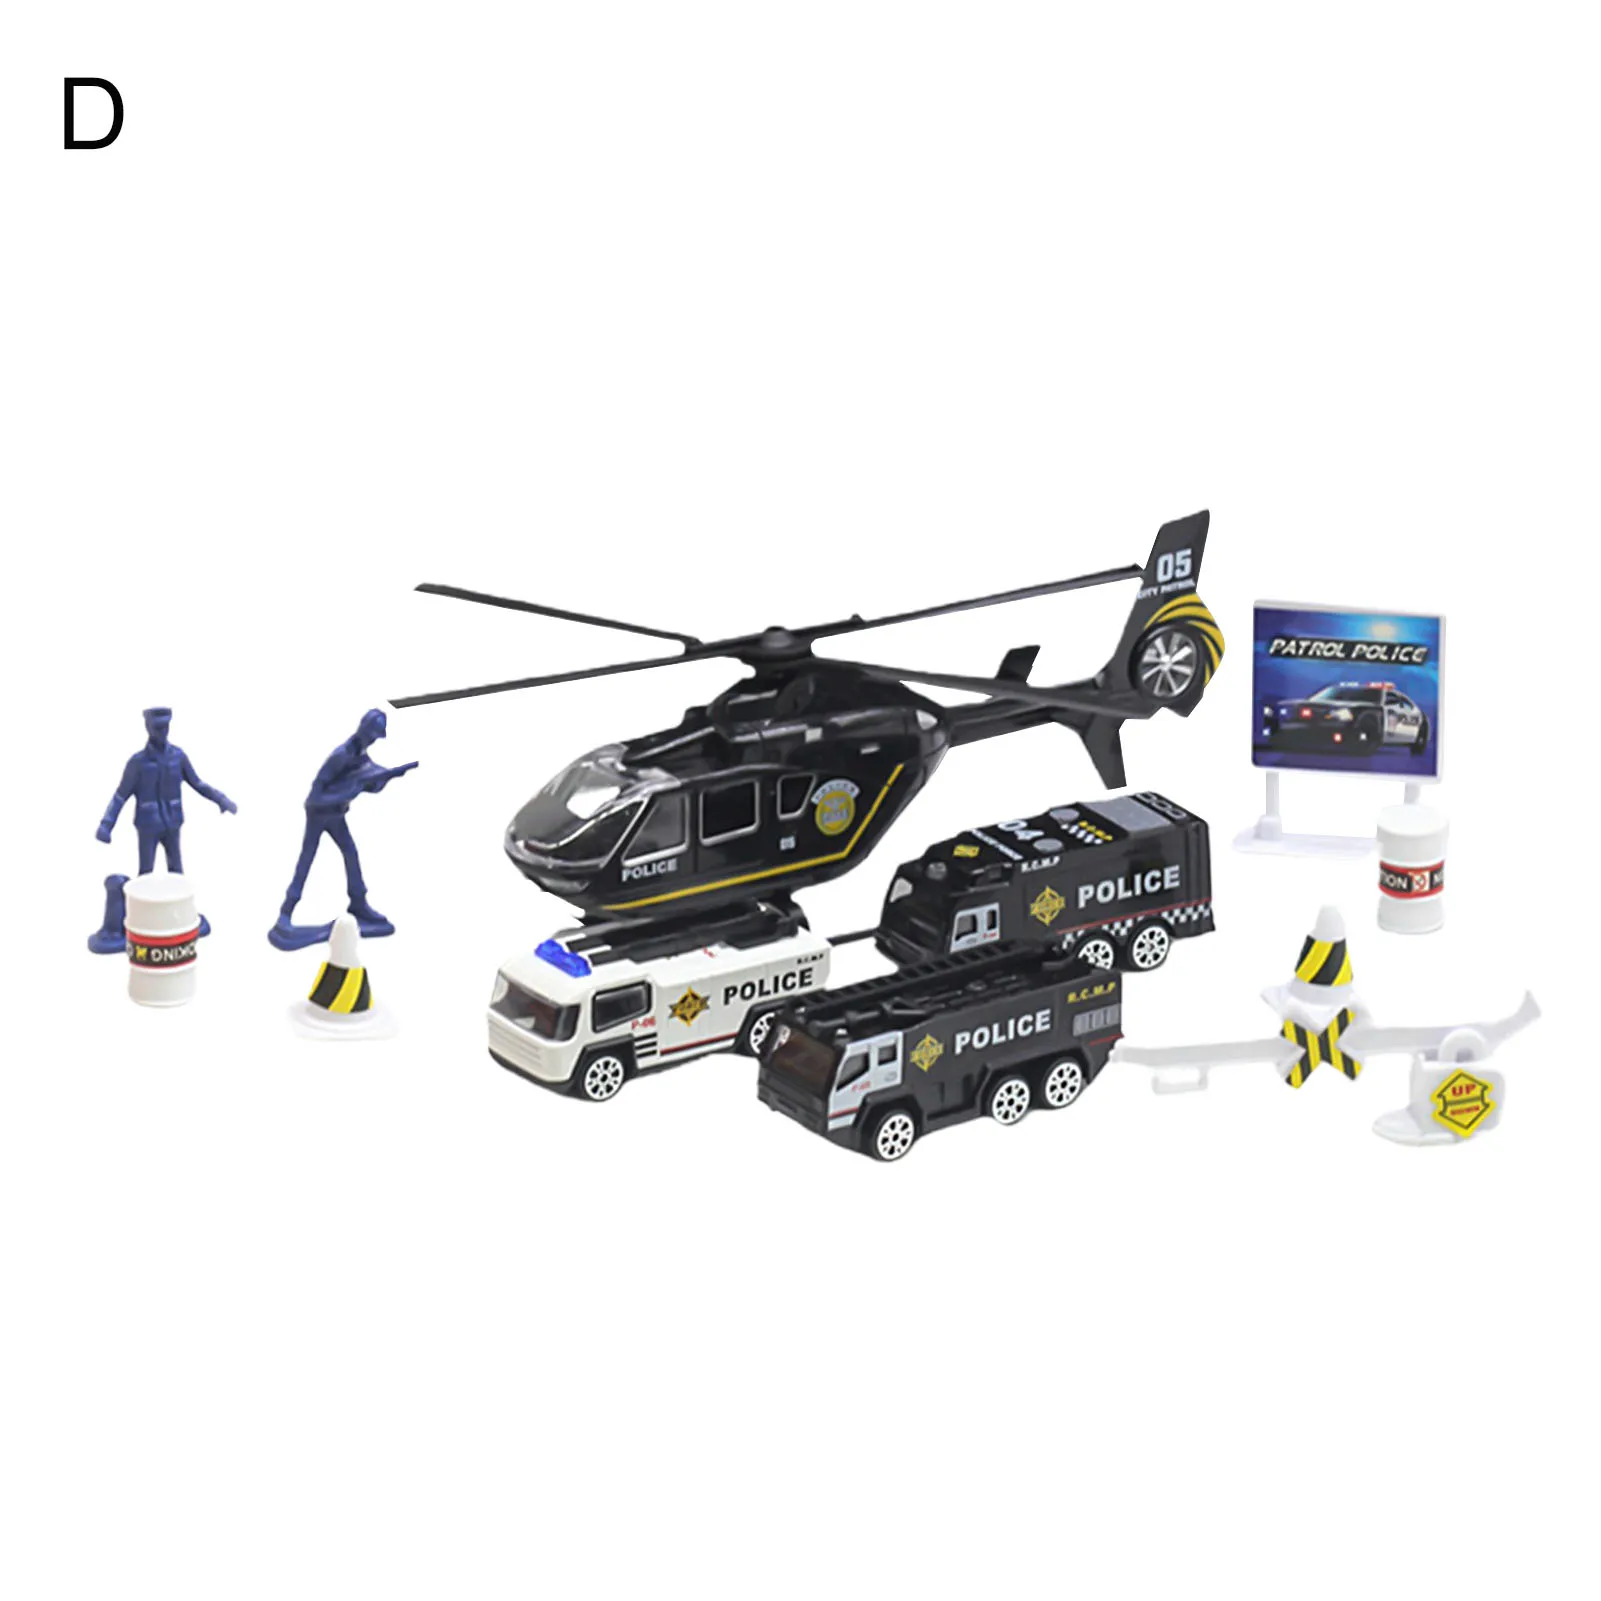 

Engineering Fire Truck Military Police Vehicle Helicopter Kid Model Toy Ornament Parent-child Outdoor Interactive Game Toy Gifts